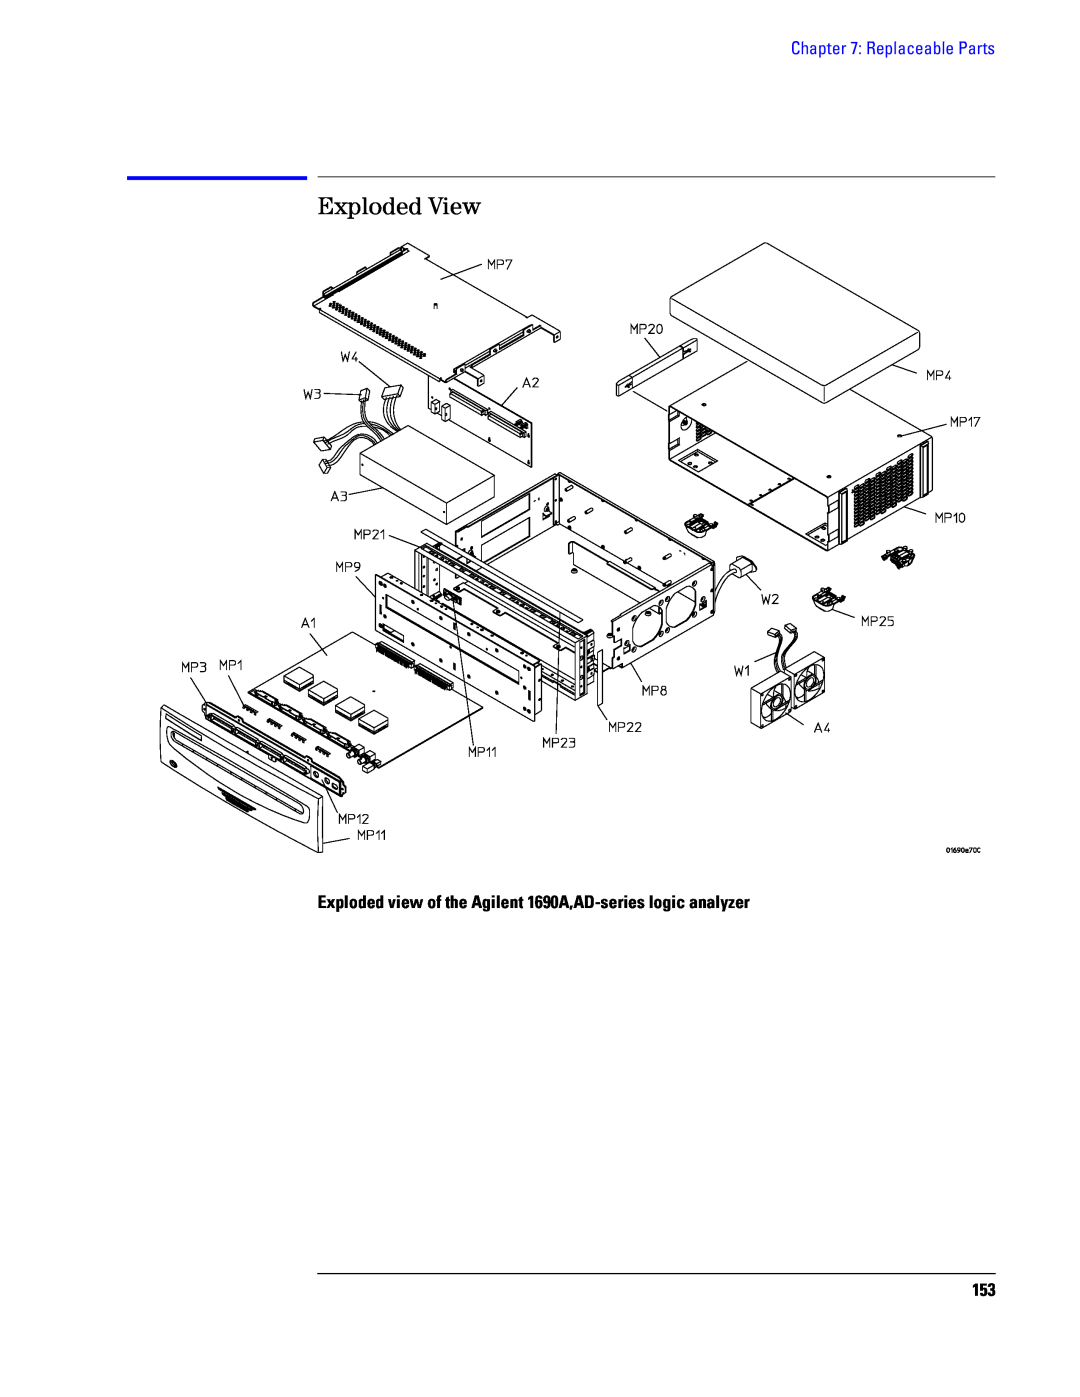 Agilent Technologies Exploded View, Replaceable Parts, Exploded view of the Agilent 1690A,AD-series logic analyzer 